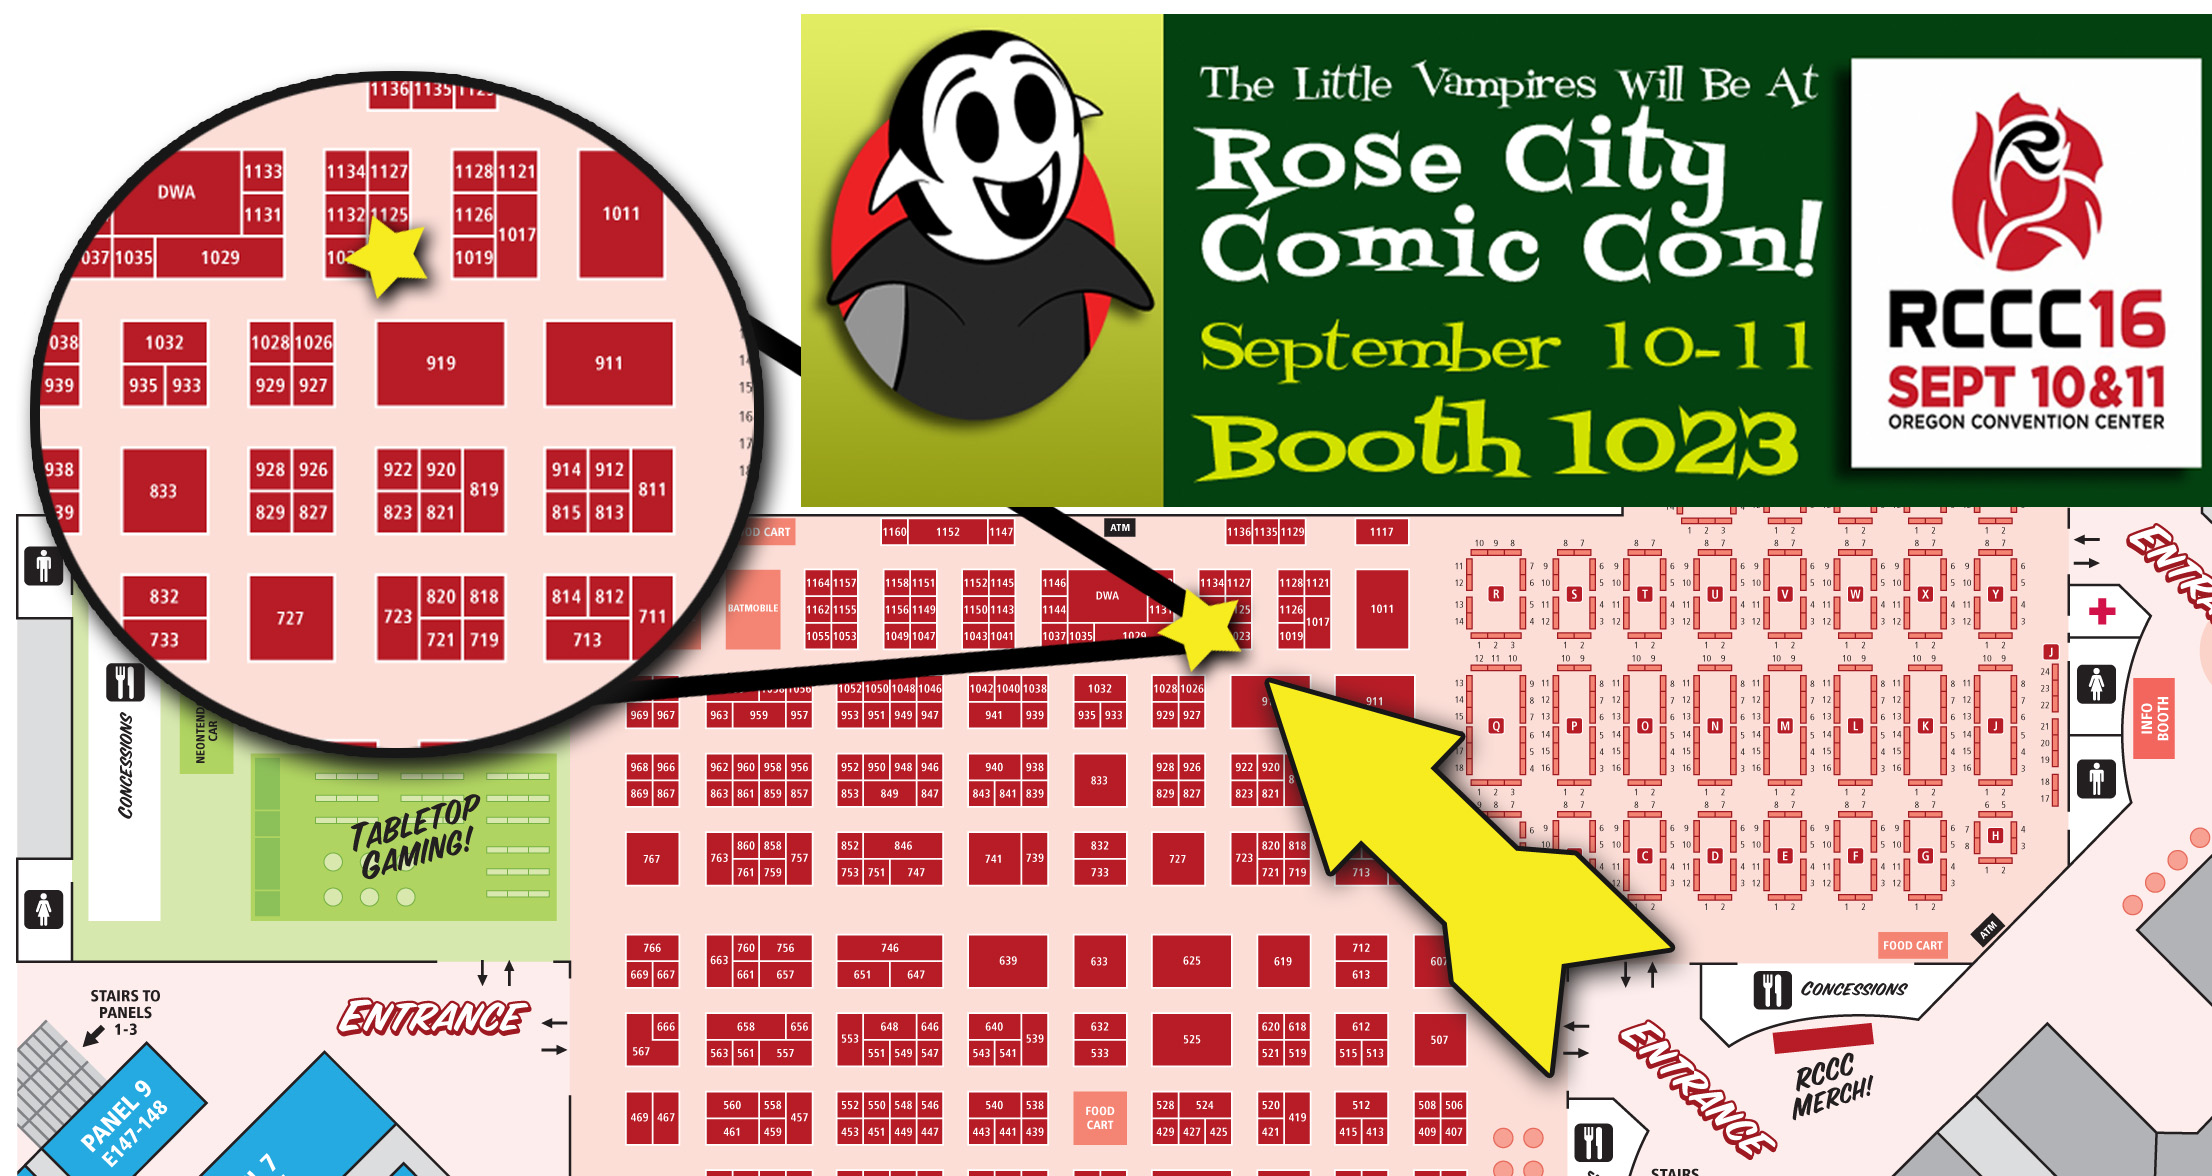 Rose City Comic Con 2016 exhibitor floor map with the Little Vampires booth highlighted